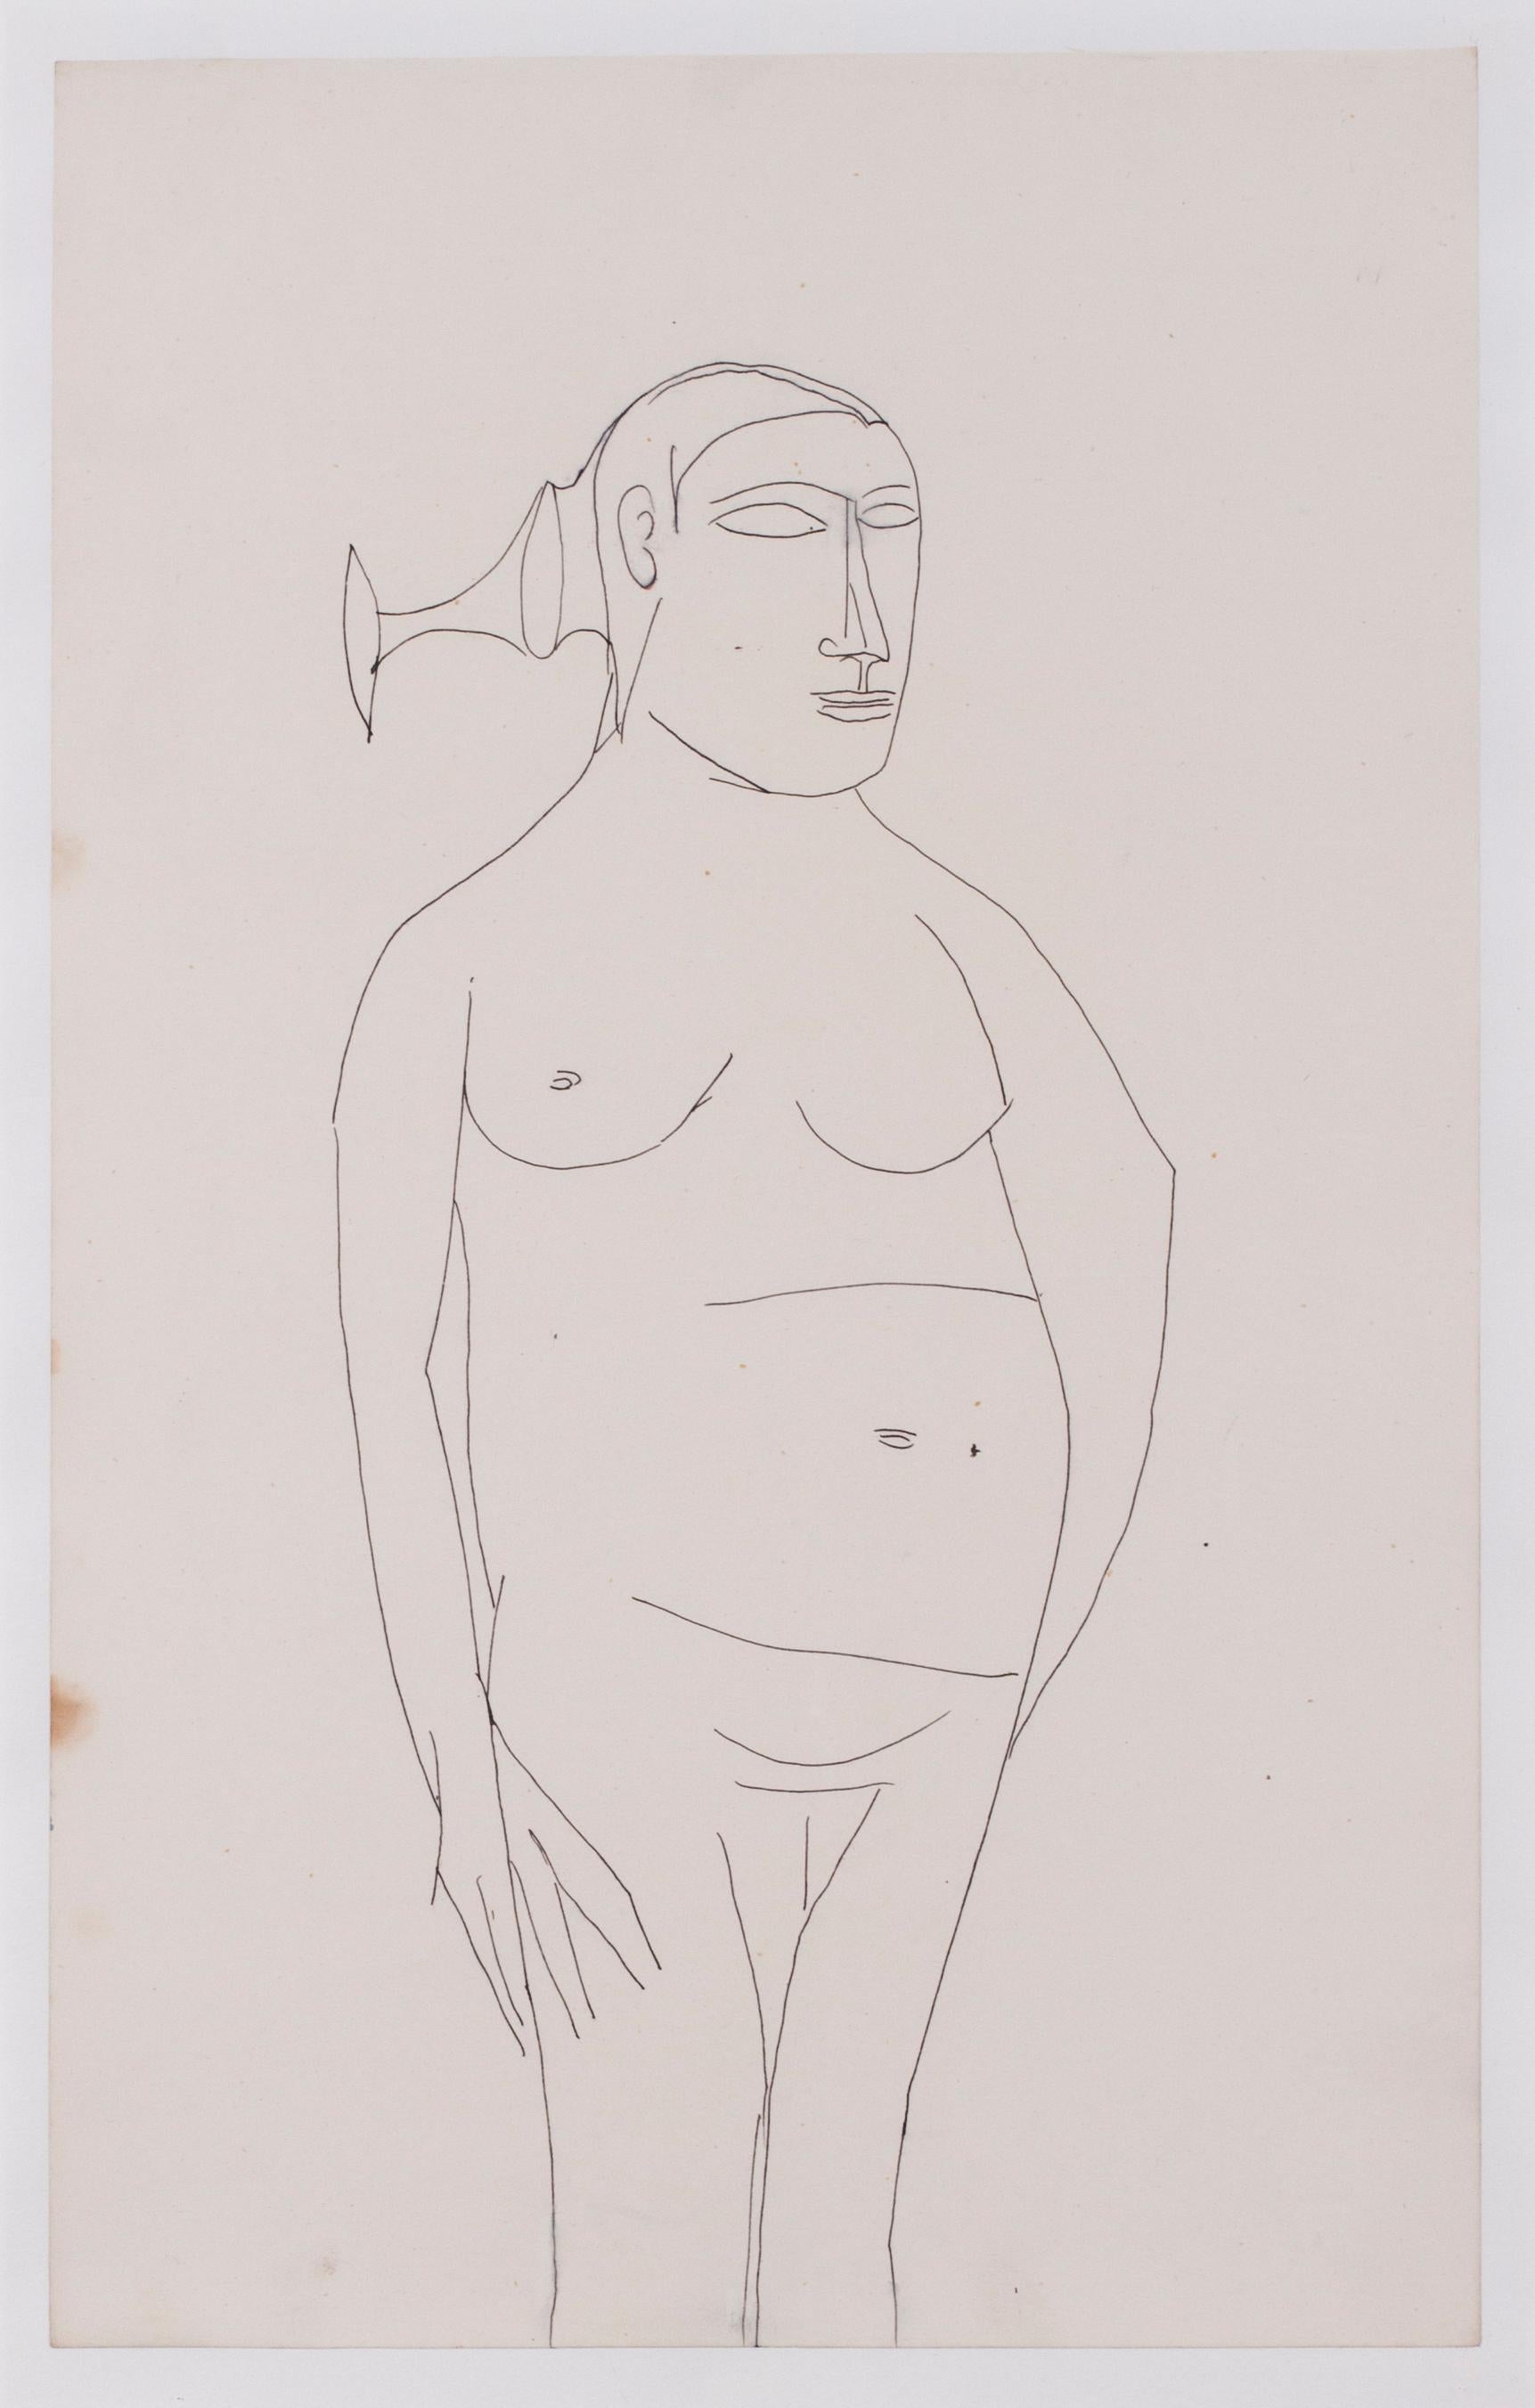 A 20th Century drawing of a nude by Indian artist Francis Newton Souza - Abstract Expressionist Art by F.N. Souza